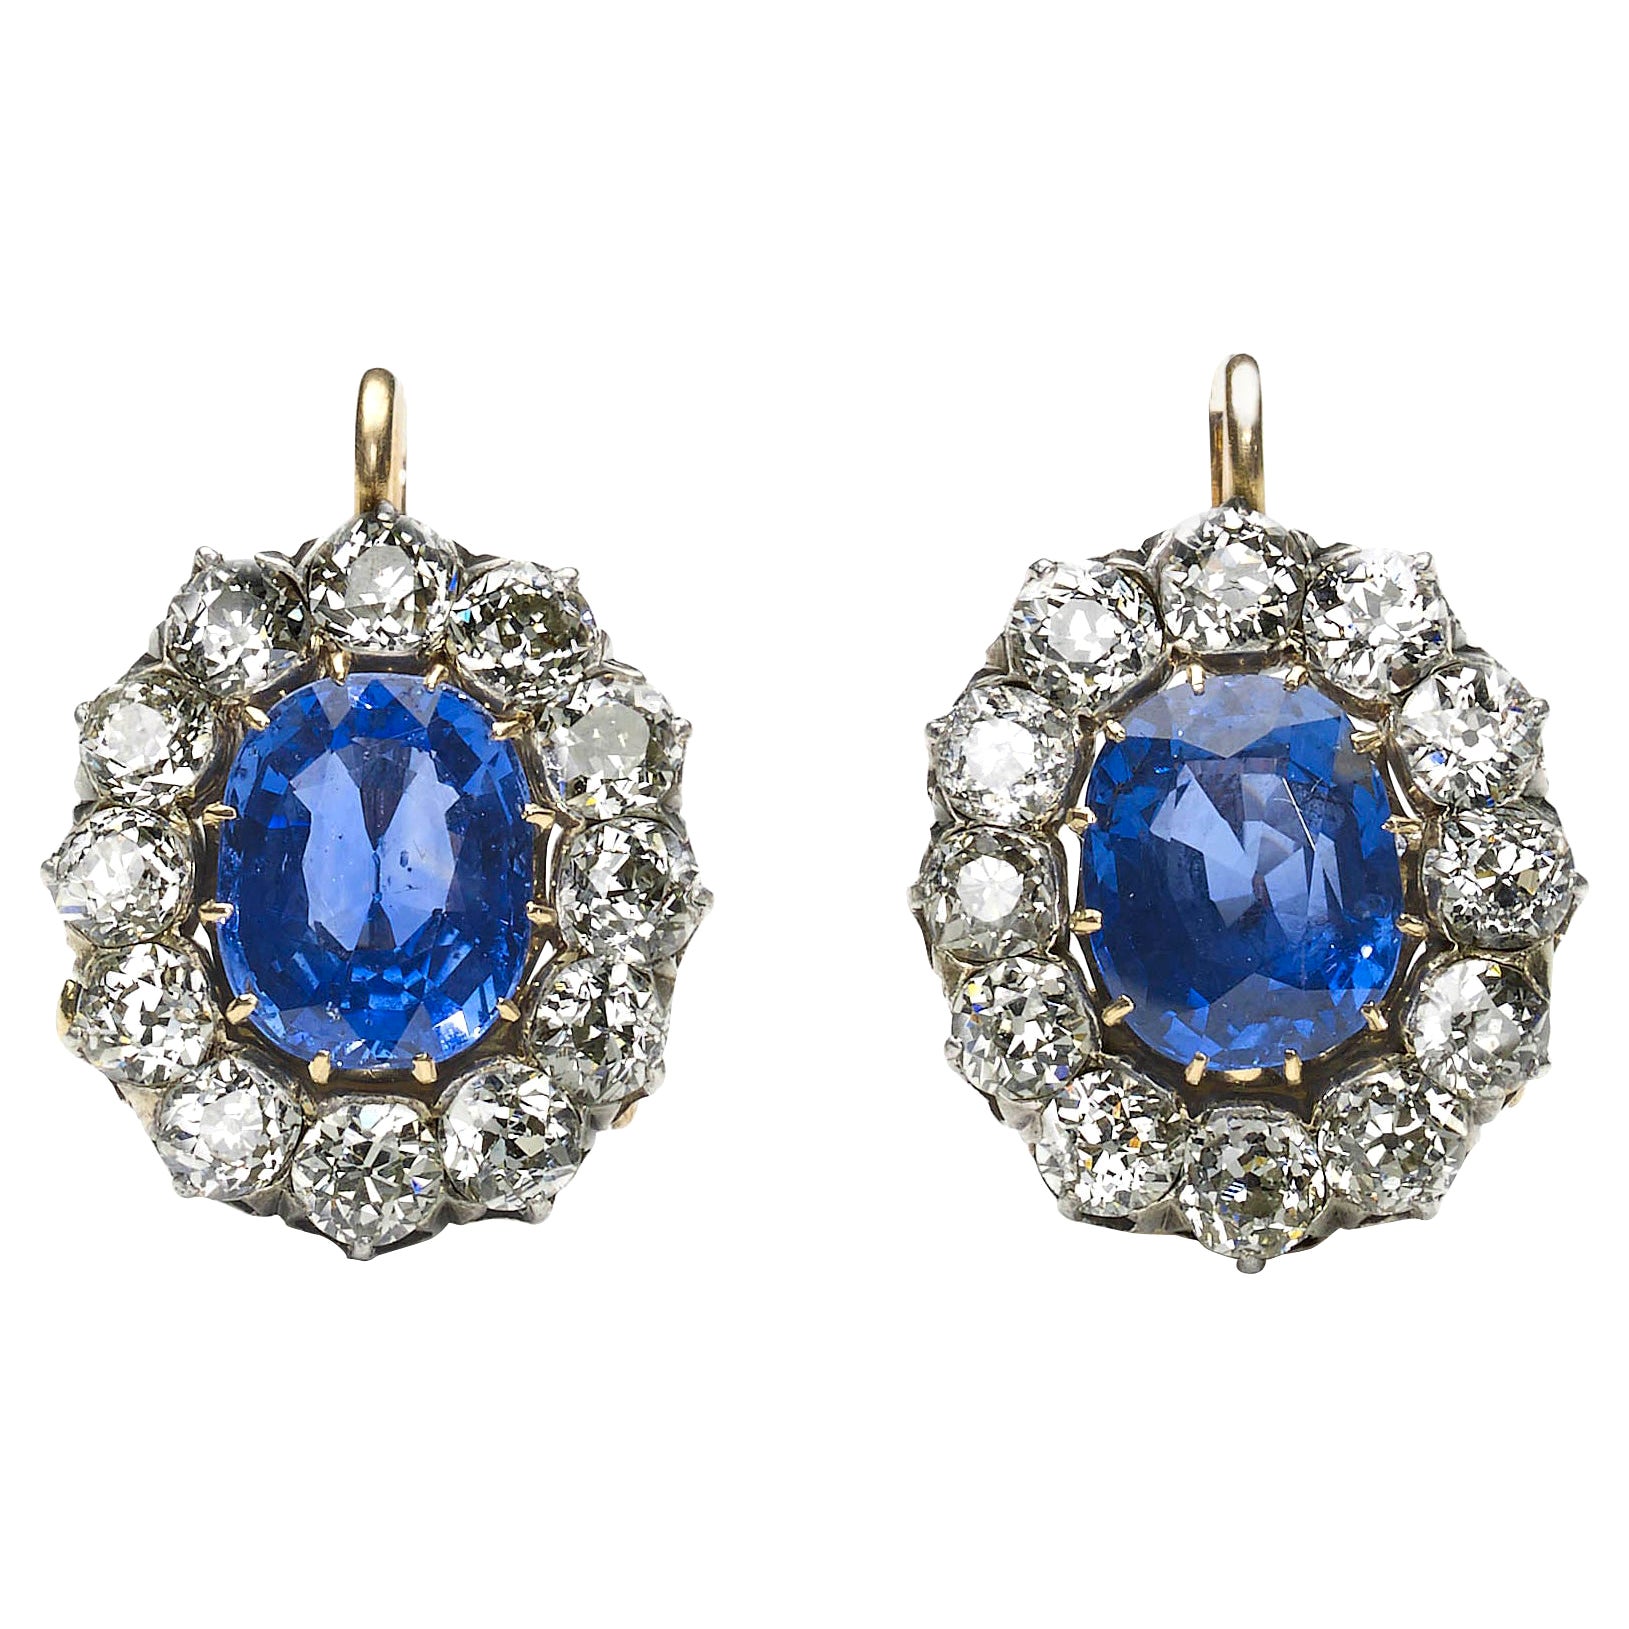 Sapphire And Diamond Cluster Earrings, Platinum And Gold, Circa 1890